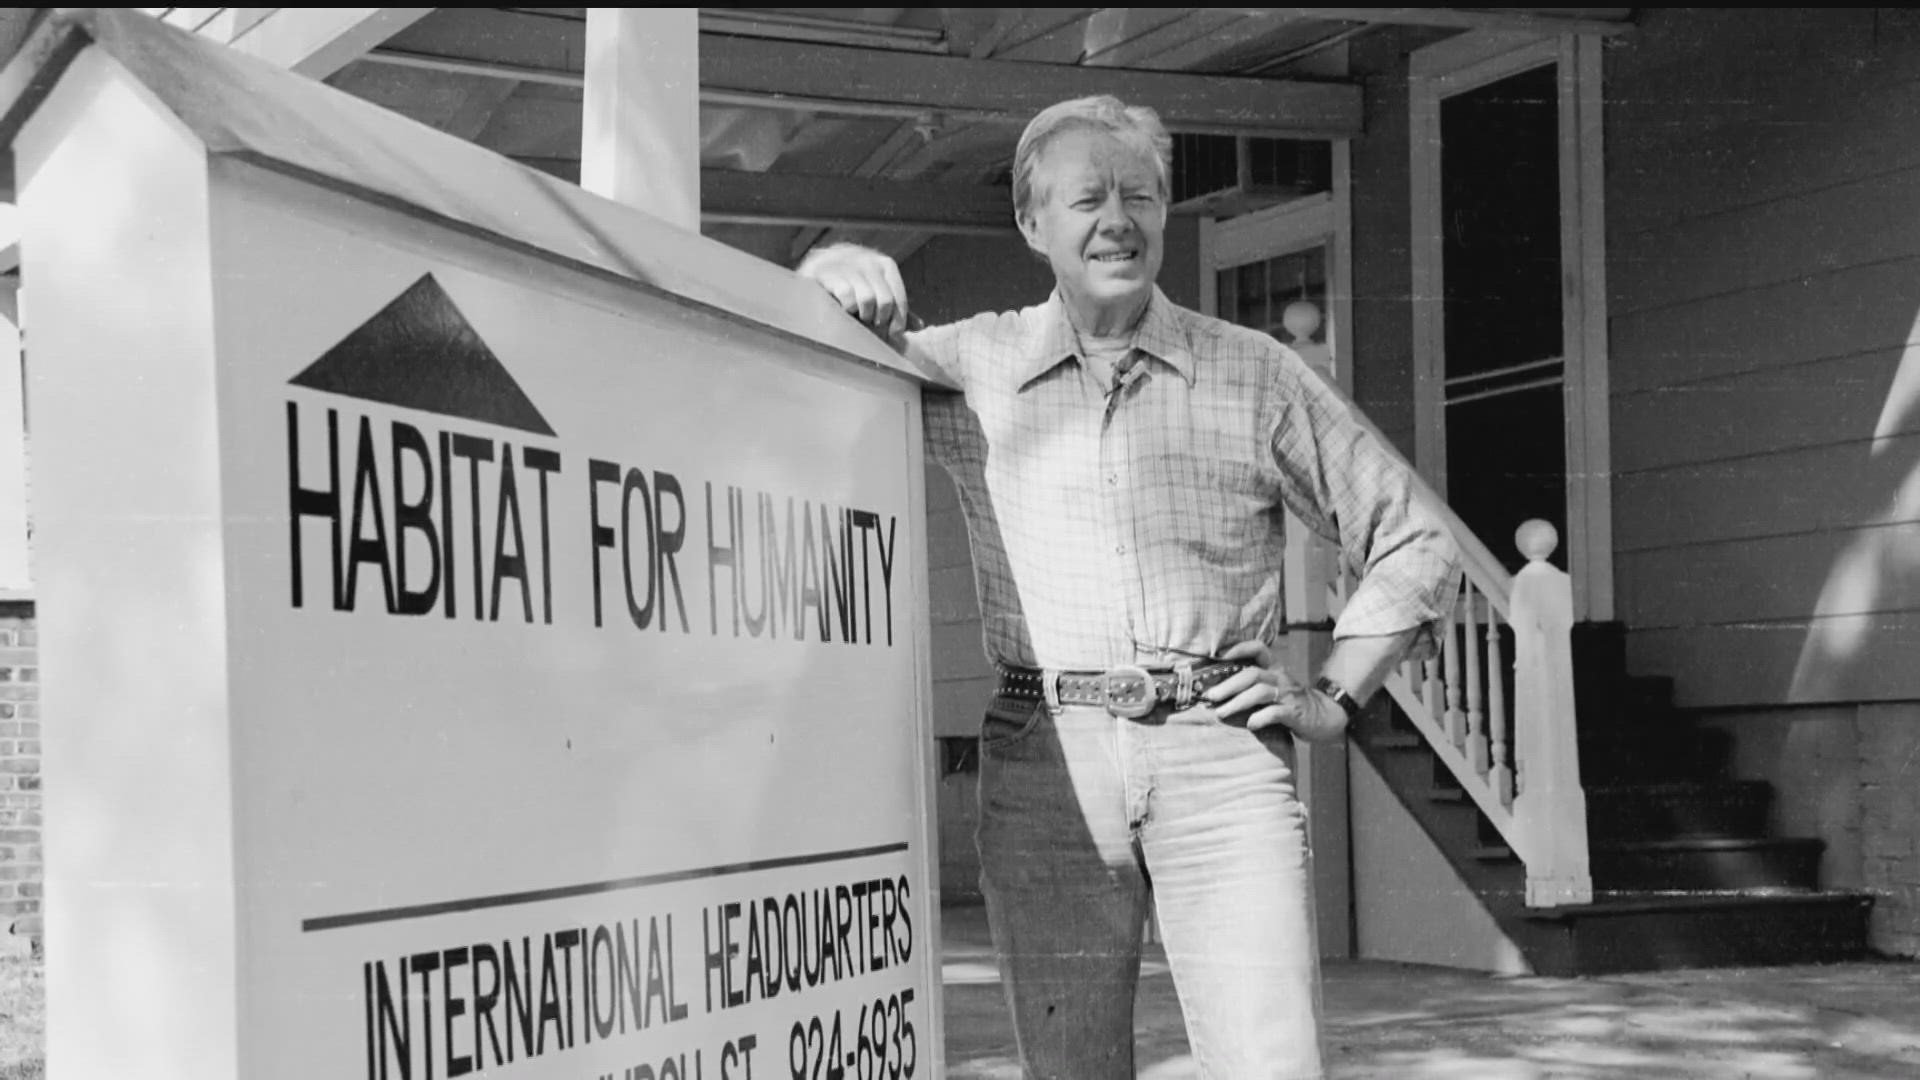 Even into his 90s, former president Jimmy Carter was on the ground, helping build homes.